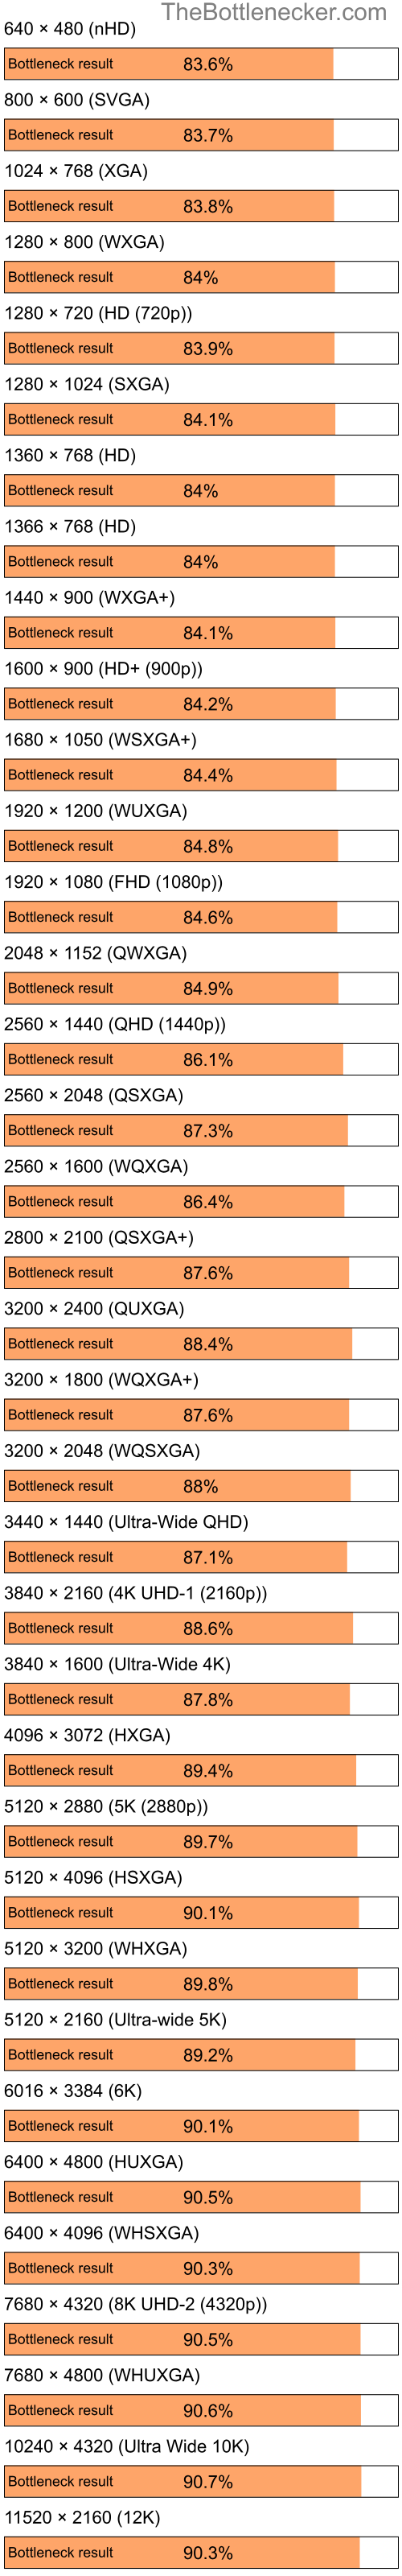 Bottleneck results by resolution for Intel Celeron M 410 and NVIDIA GeForce FX 5700LE in Graphic Card Intense Tasks